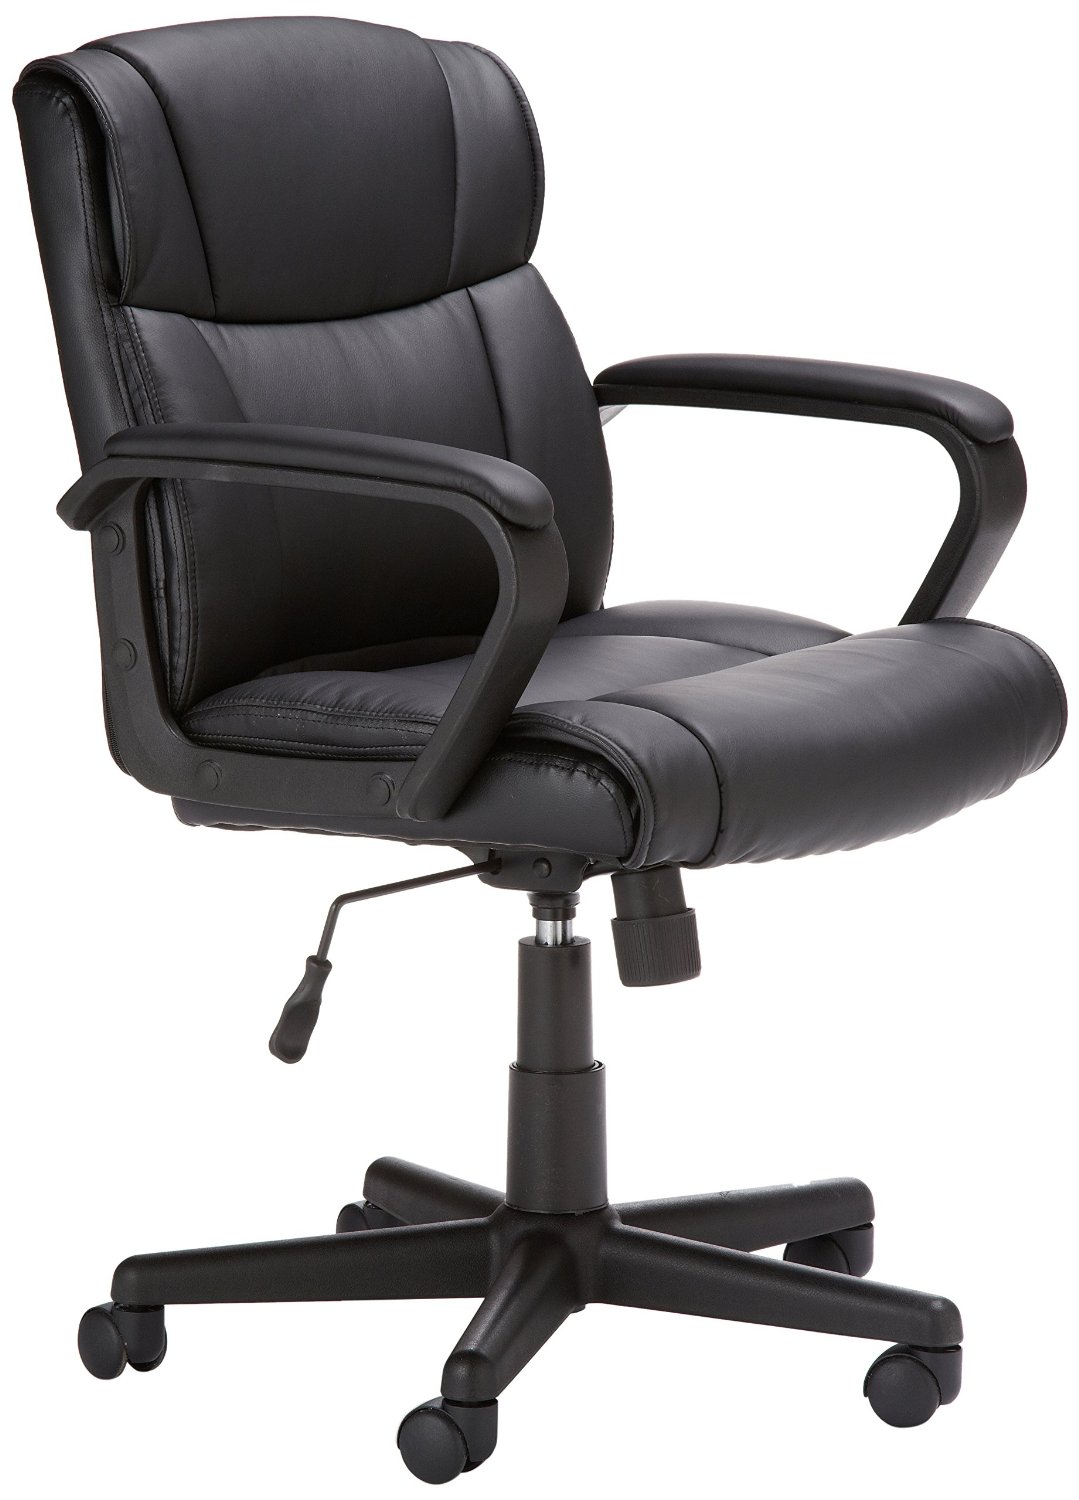 Top 10 Best Office Chairs 2017 - Top Value Reviews